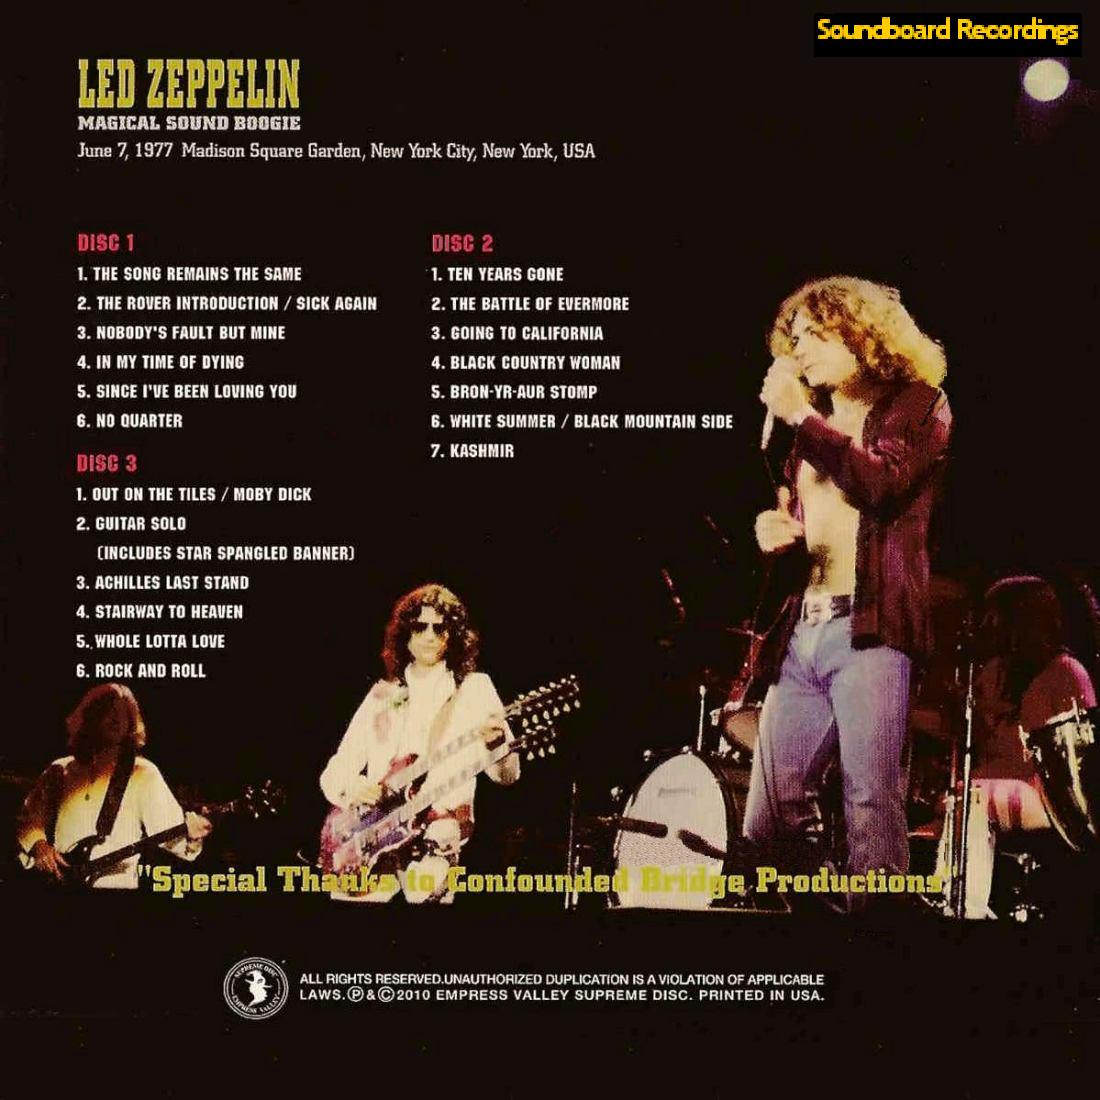 Led Zeppelin_Magical Sound Boogie_2